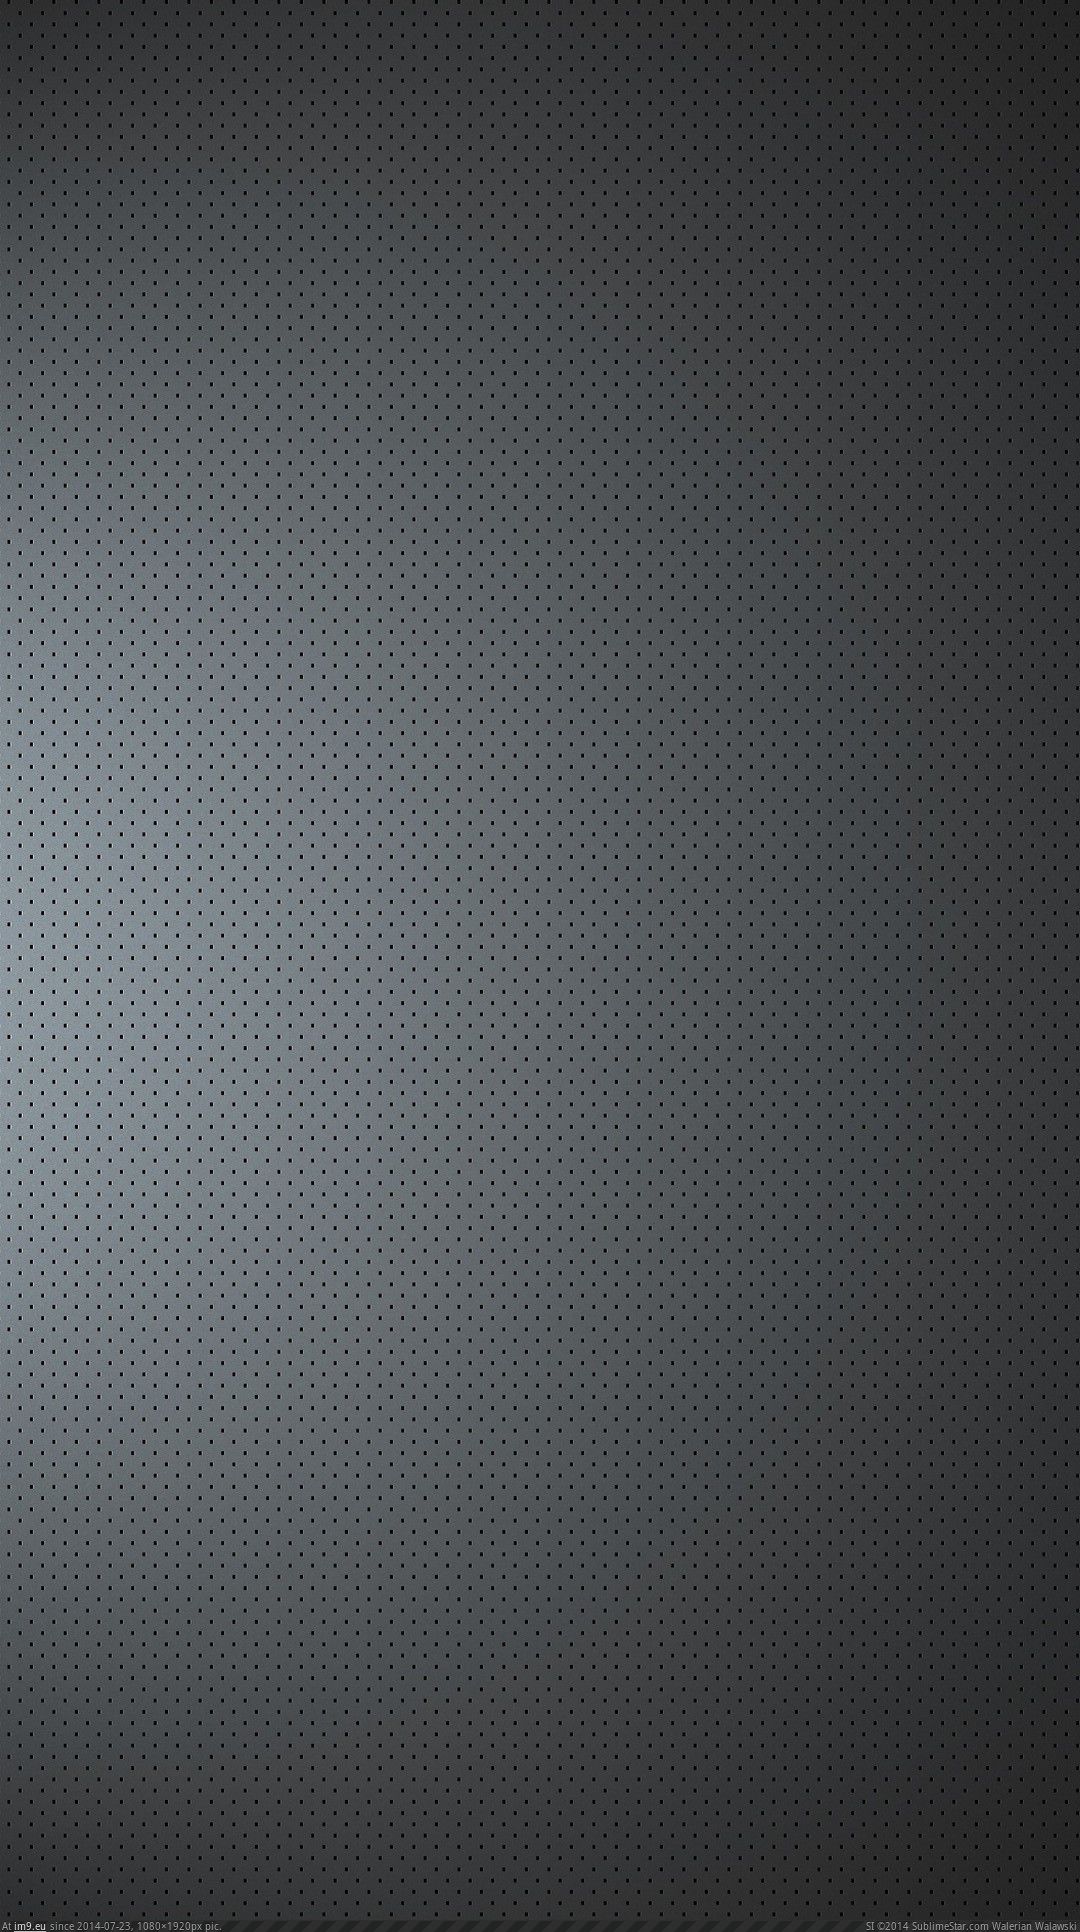 perforated-metal-texture-abstract-hd-wallpaper-1920x1080-4424 (in Idol6040Dpics)